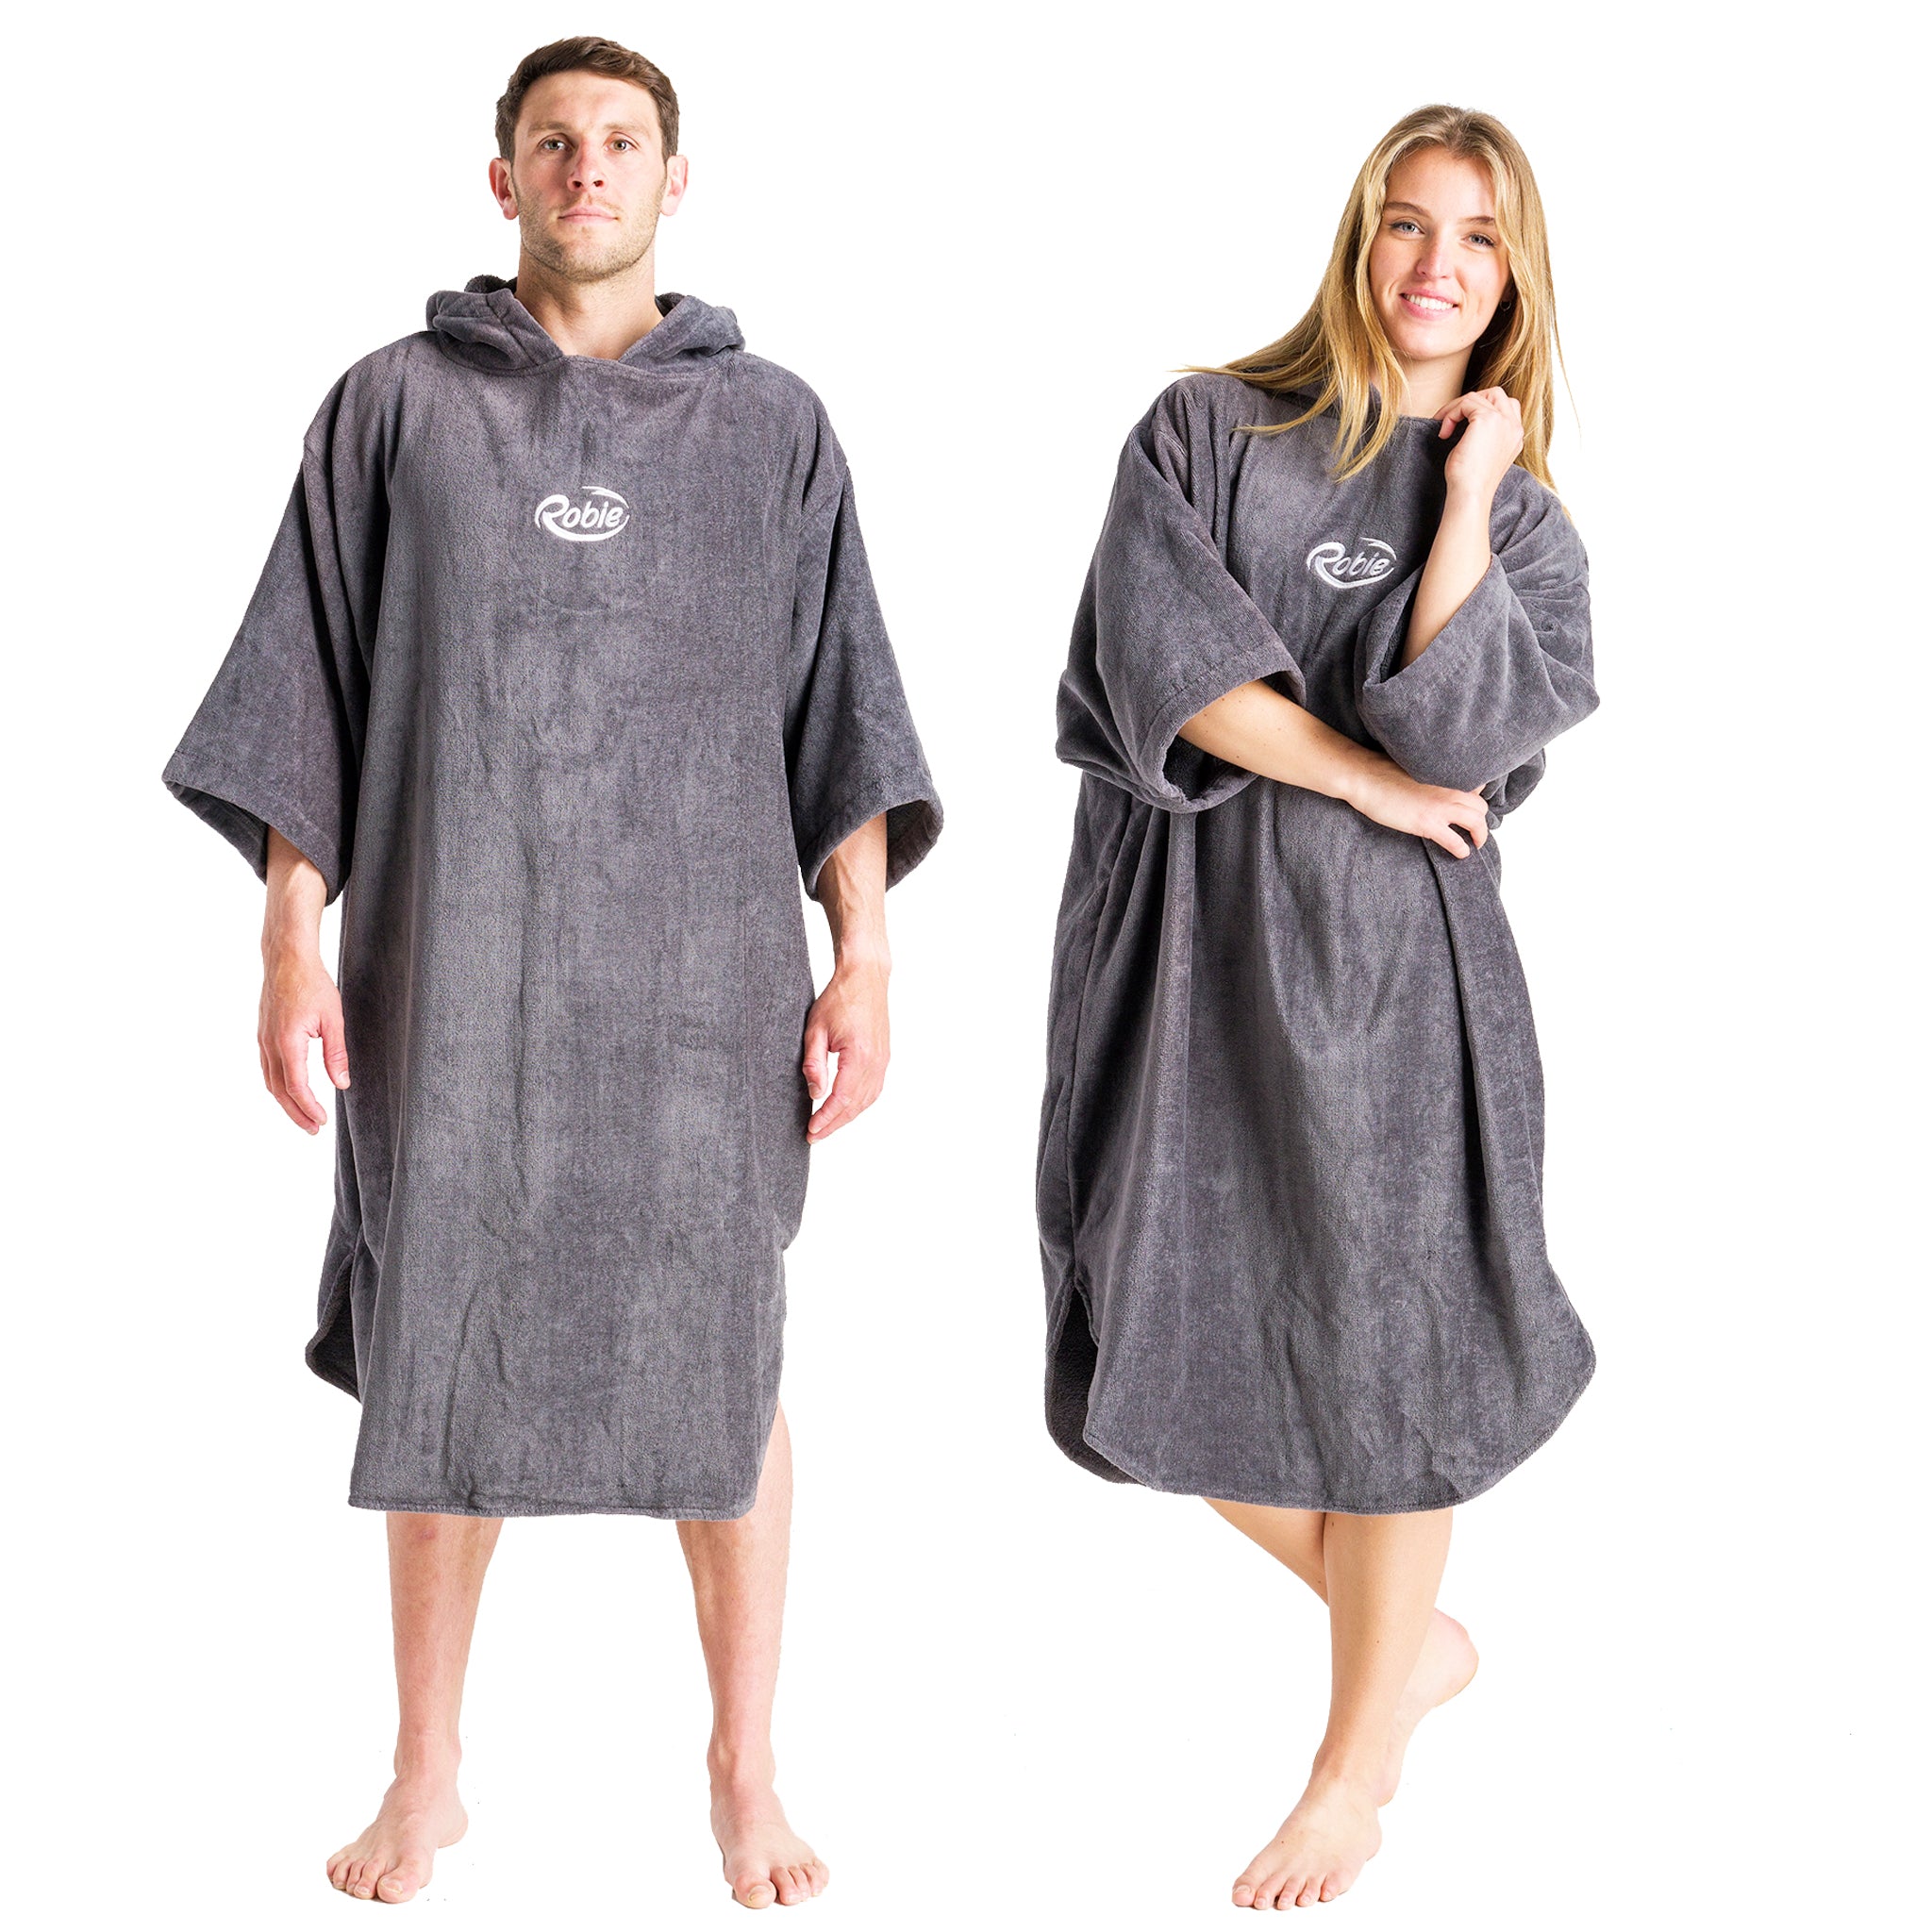 Robie Robes Adult Original Long Sleeve Towelling Beach Changing Poncho - Steel Grey